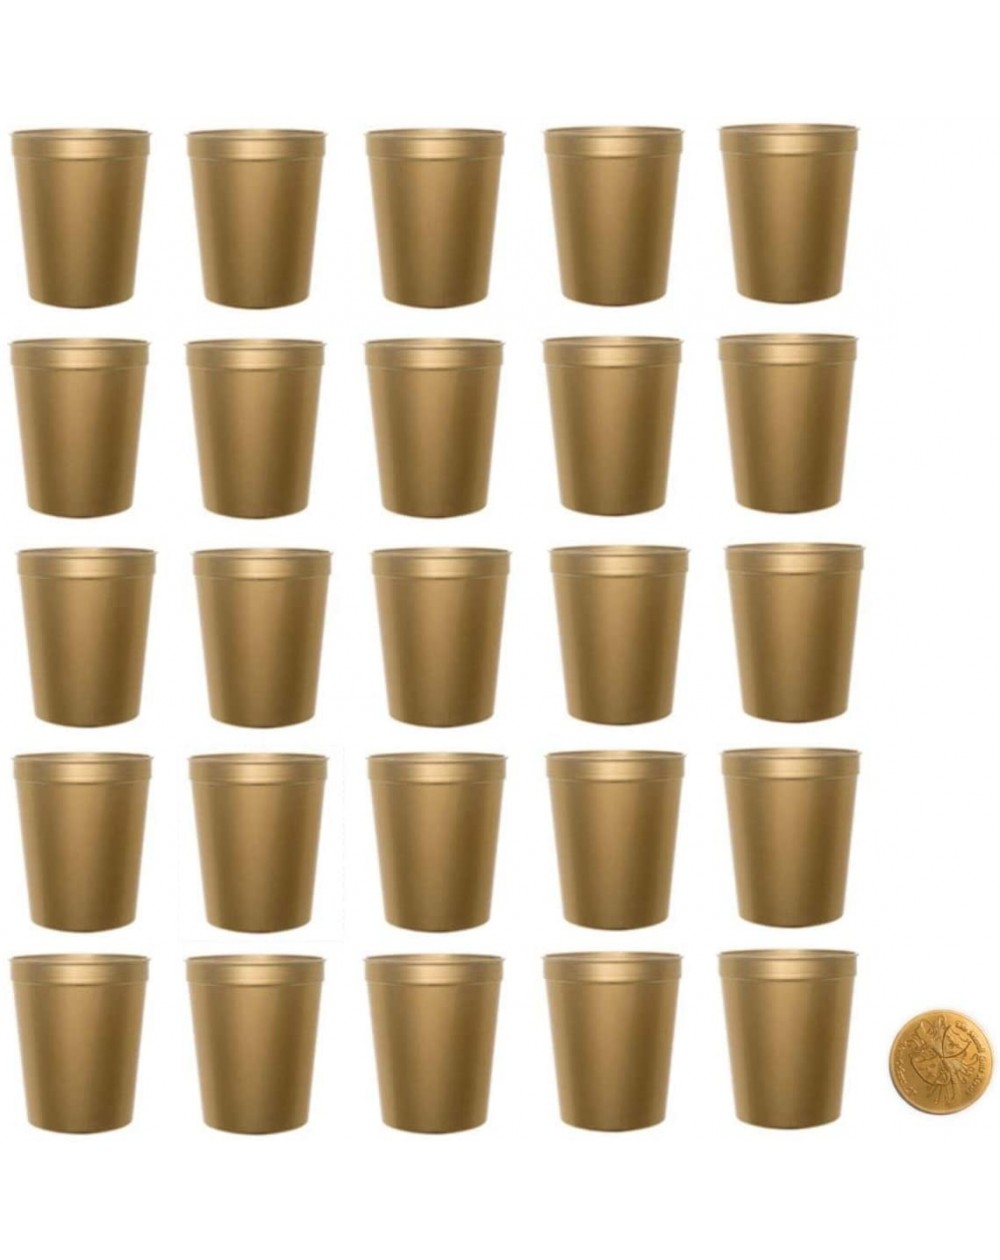 Tableware Metallic Gold Plastic Party Cups- Pack of 25- Blank 16 oz Stadium Cups - Gold - CR18S73QMYA $16.75